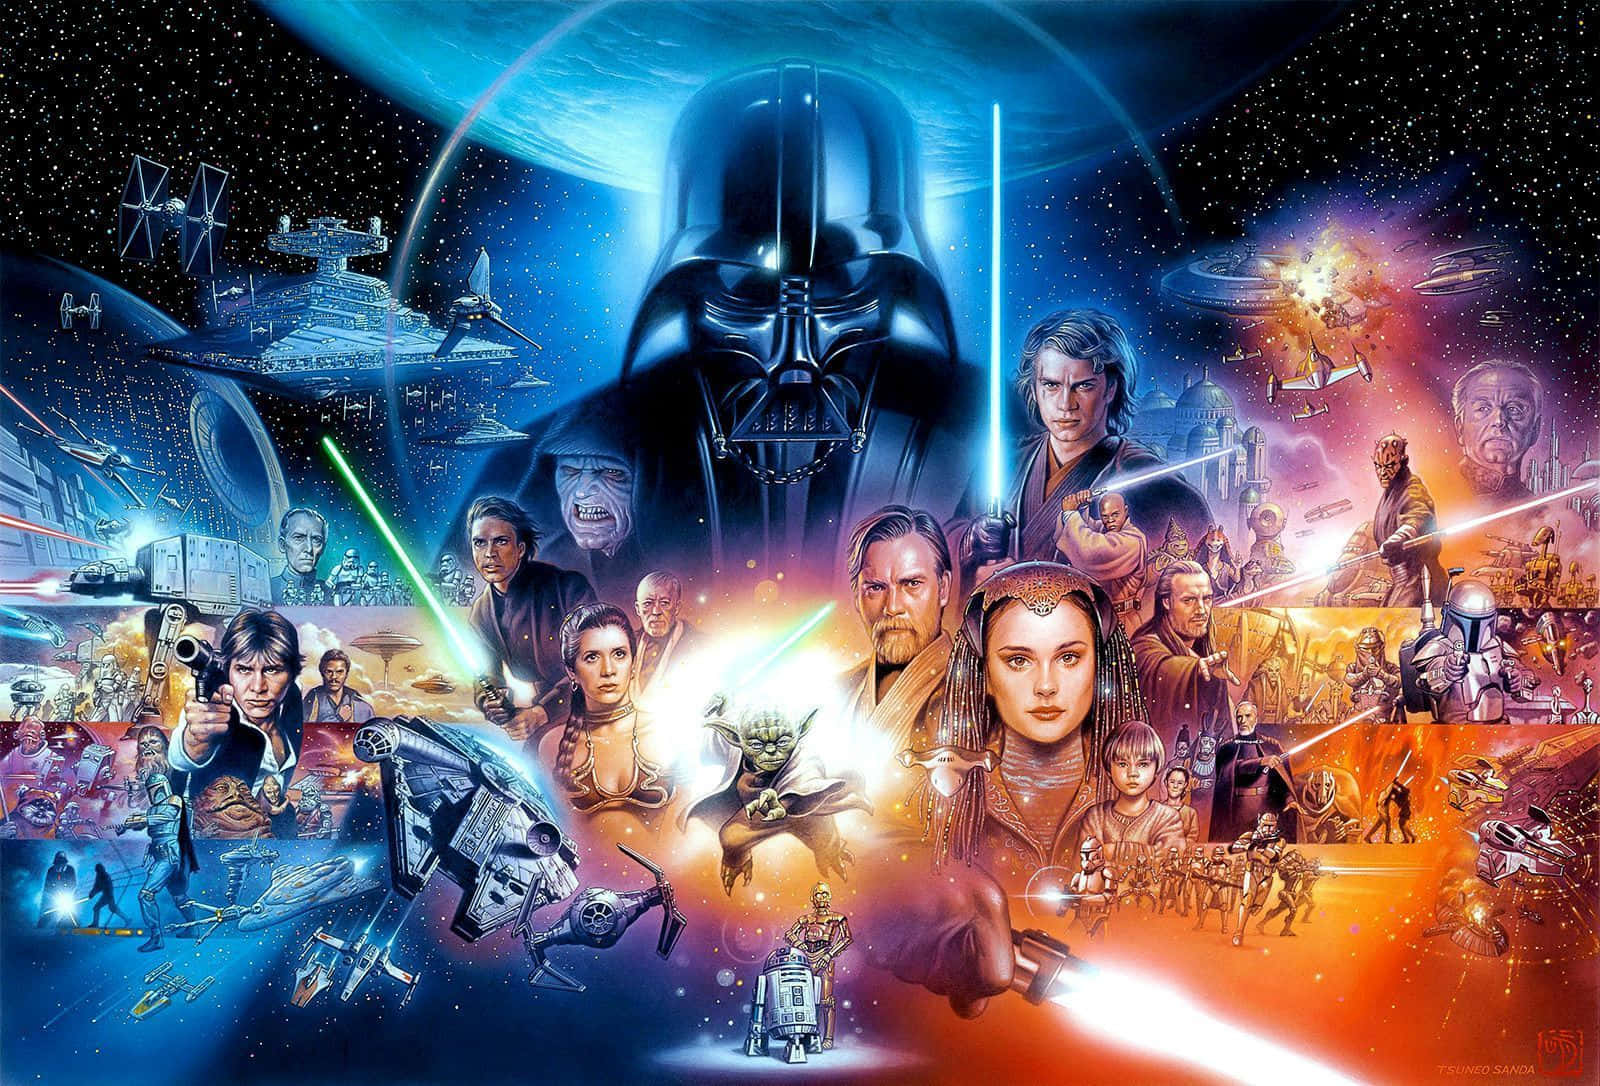 Star Wars Characters Movie Poster Wallpaper